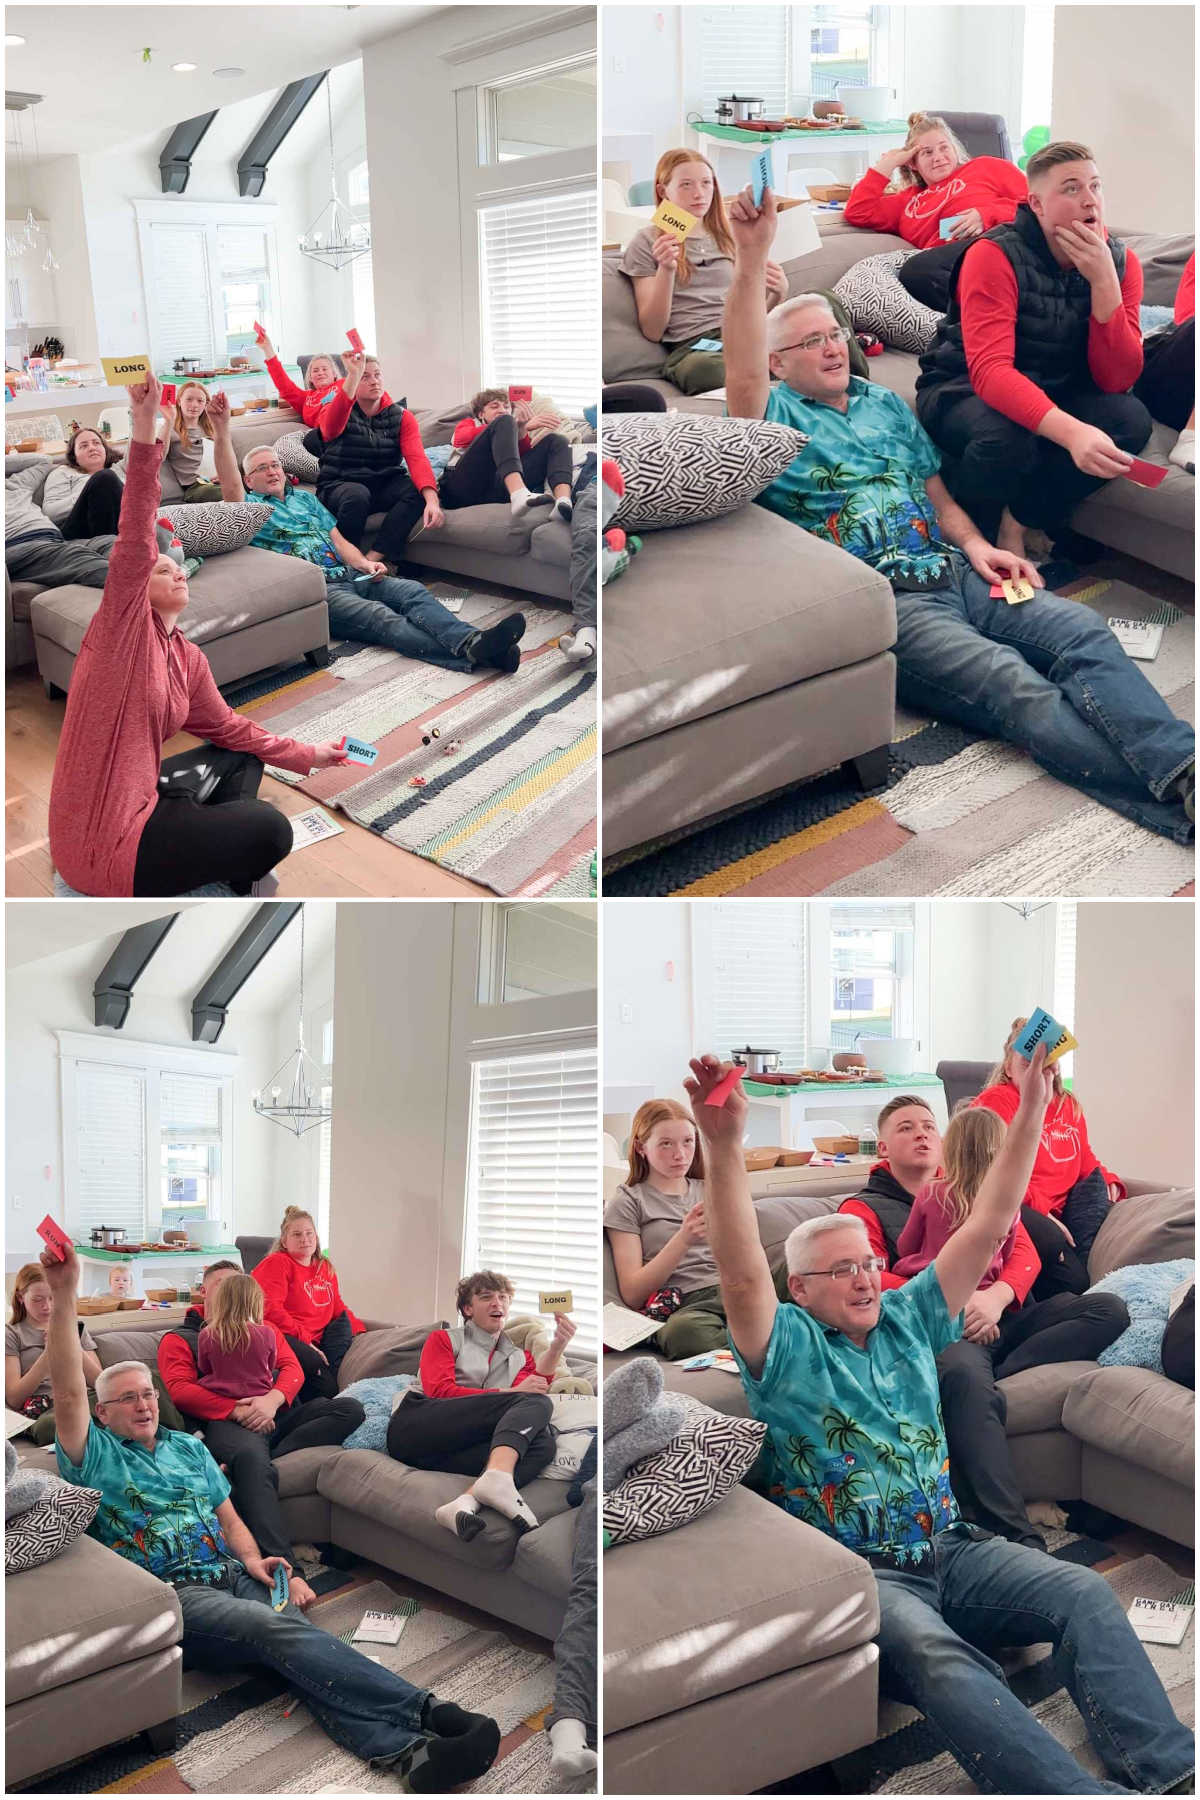 collage of images showing a group of people playing pick a play super bowl game